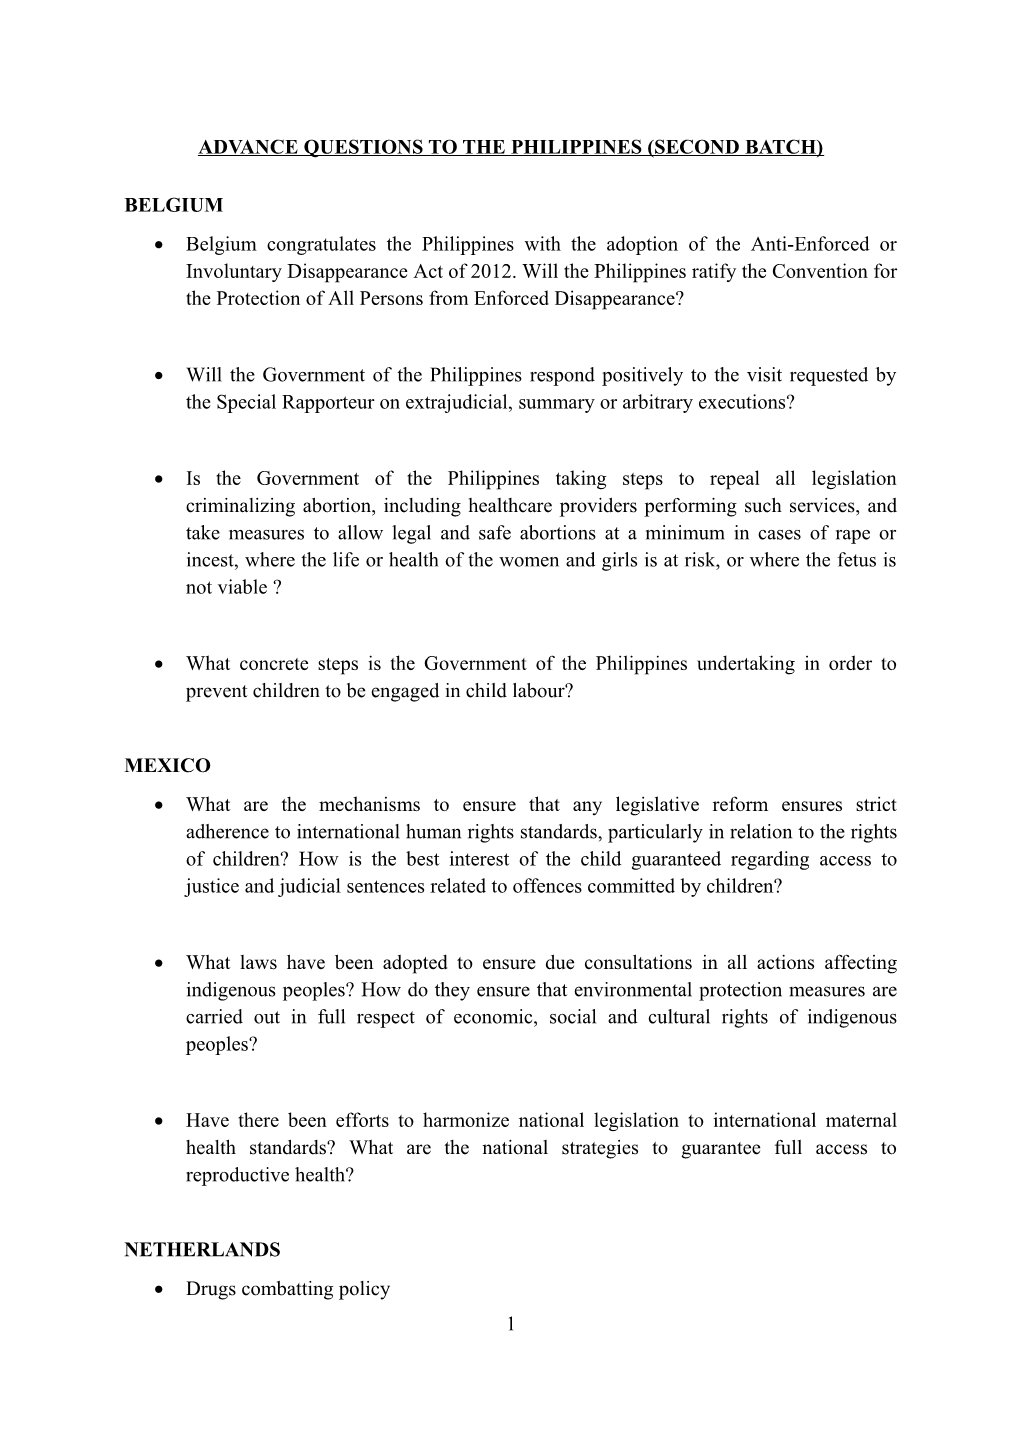 UPR Advance Questions - Philippines